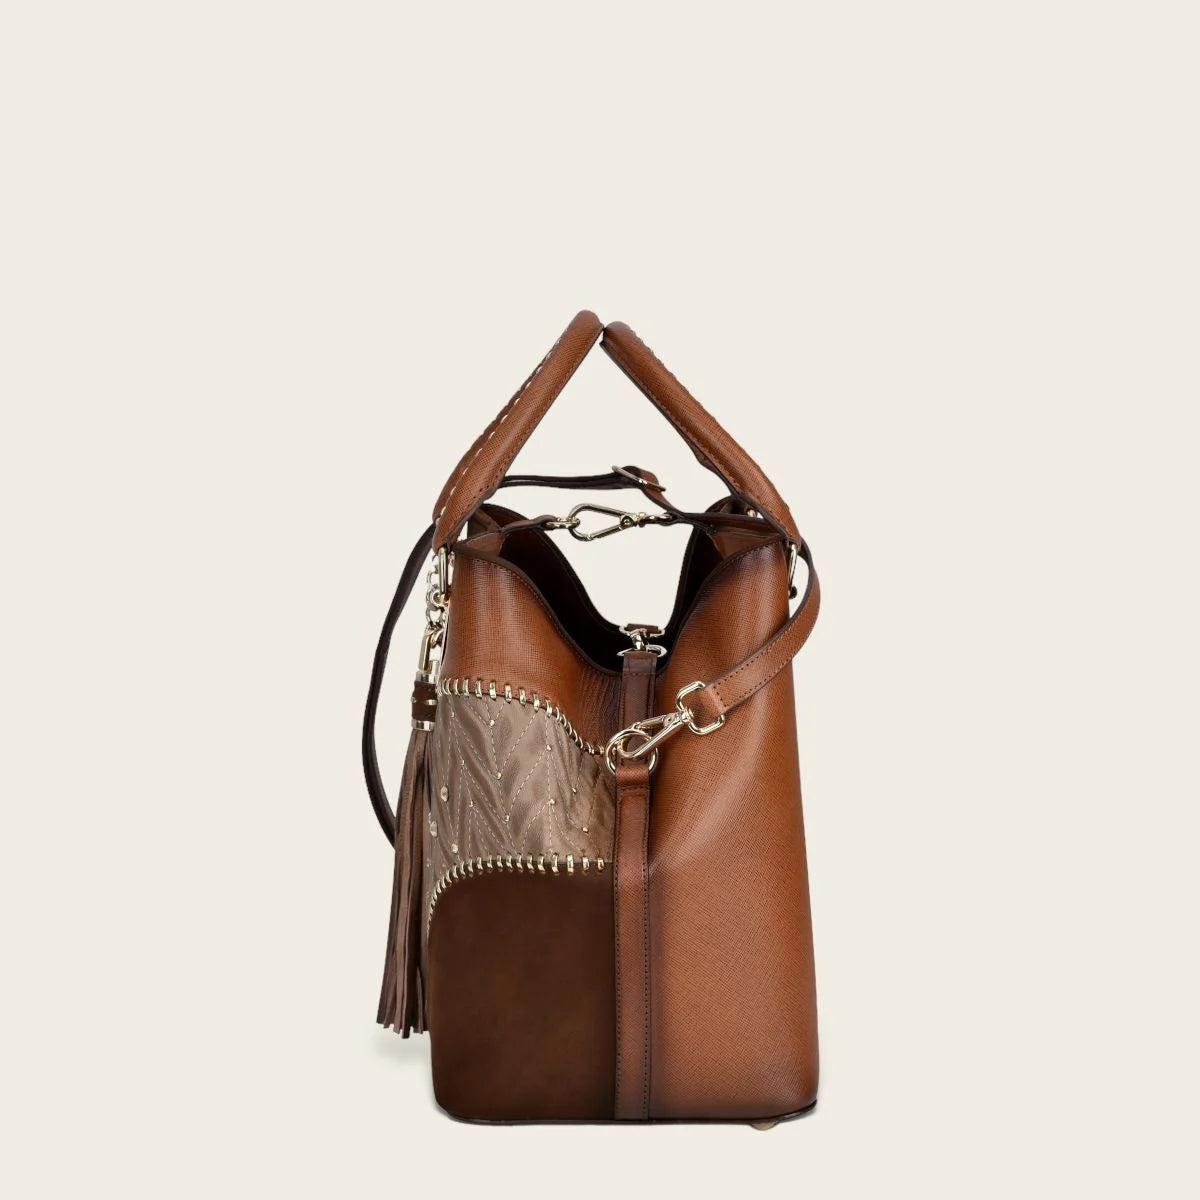 Brown leather tote bag with contrasting geometric motifs